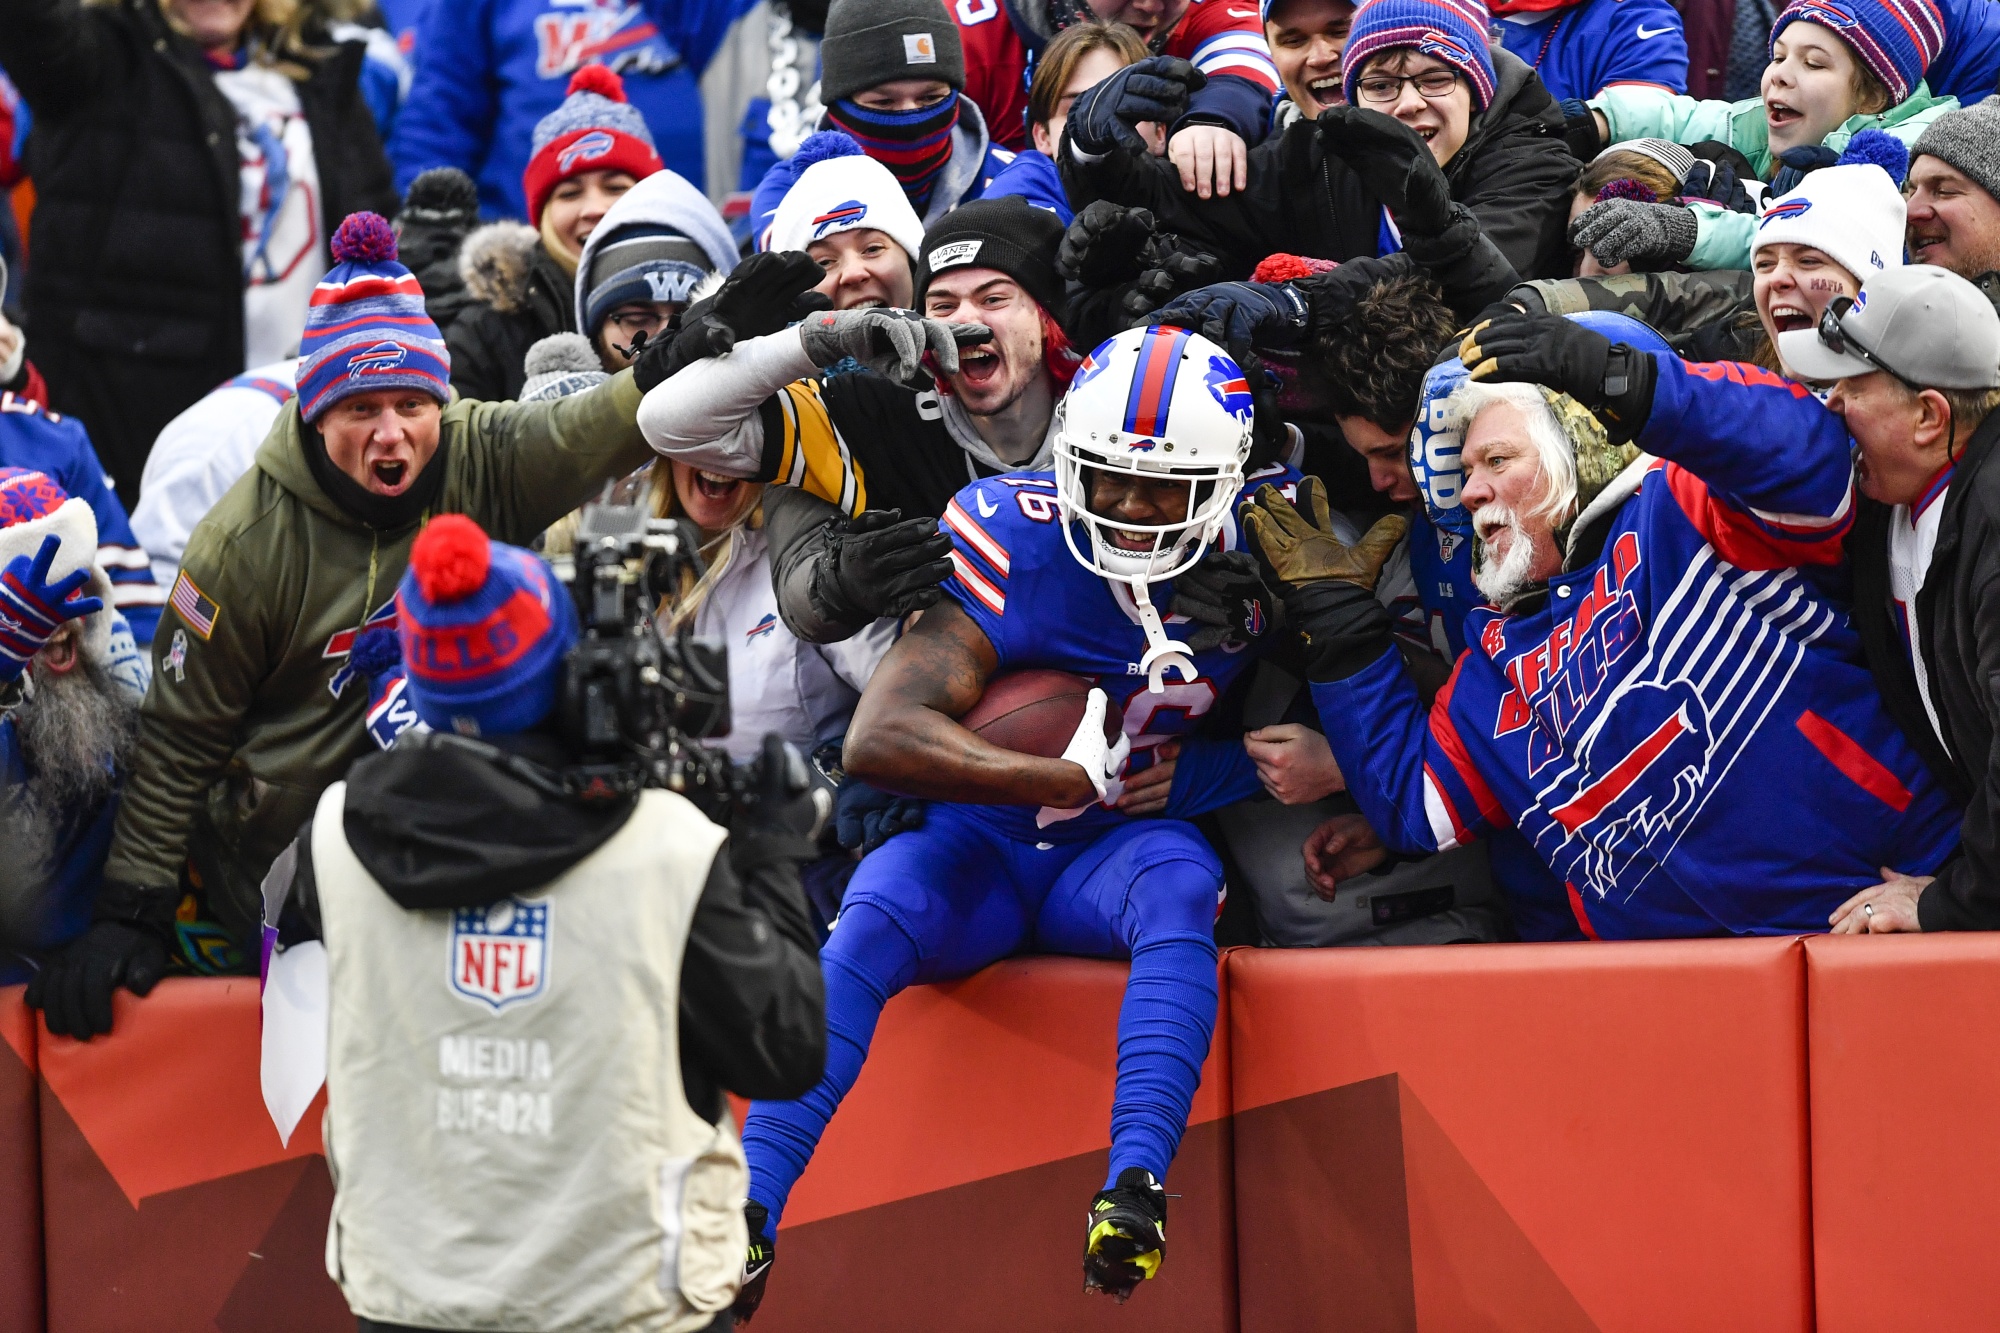 Sefon Ruxxx - Bills Win for Hamlin And Eliminate Patriots From Playoffs - Bloomberg